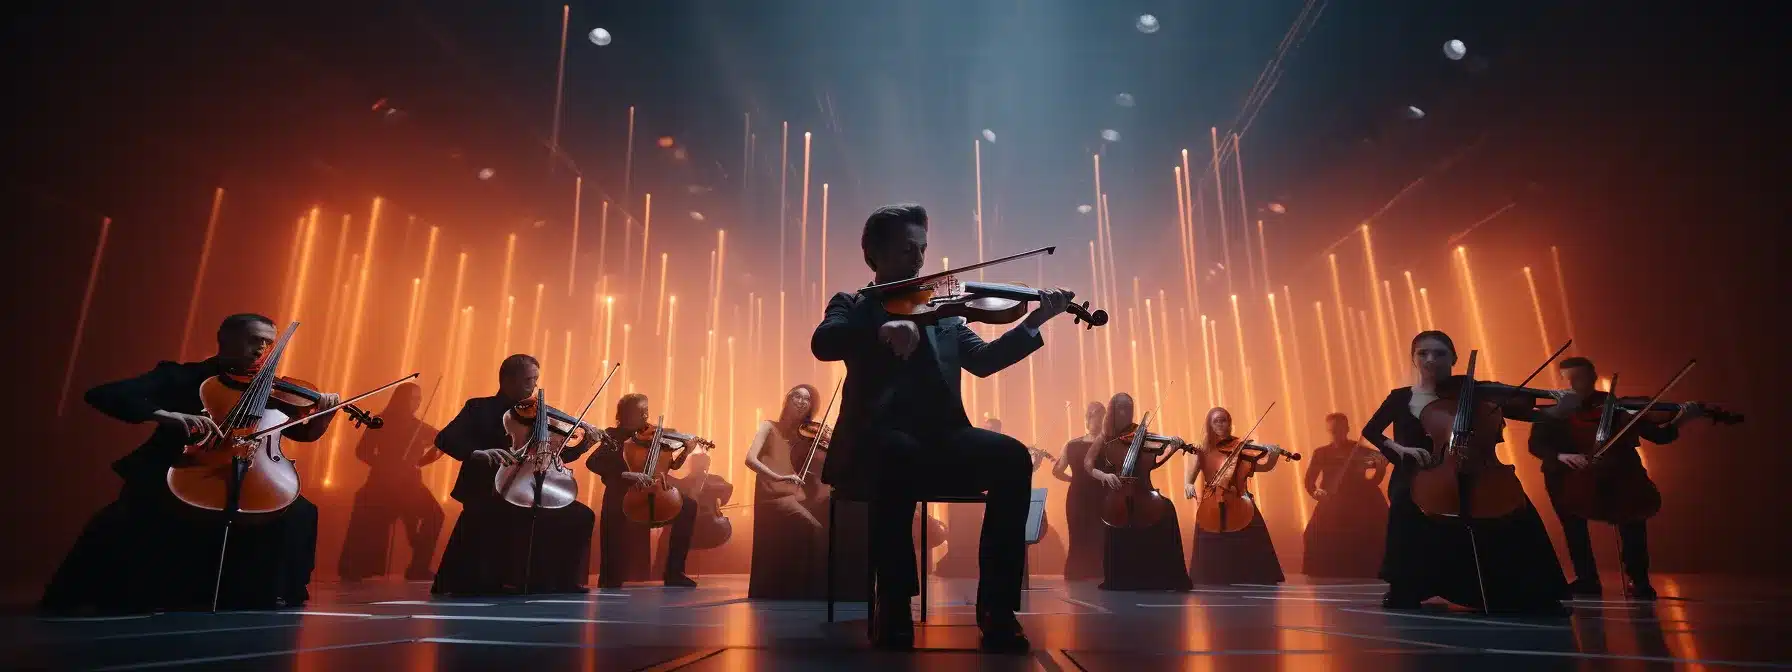 A Brand Manager Guiding A Team Of Violinists Creating A Unique Symphony That Resonates With The Audience.